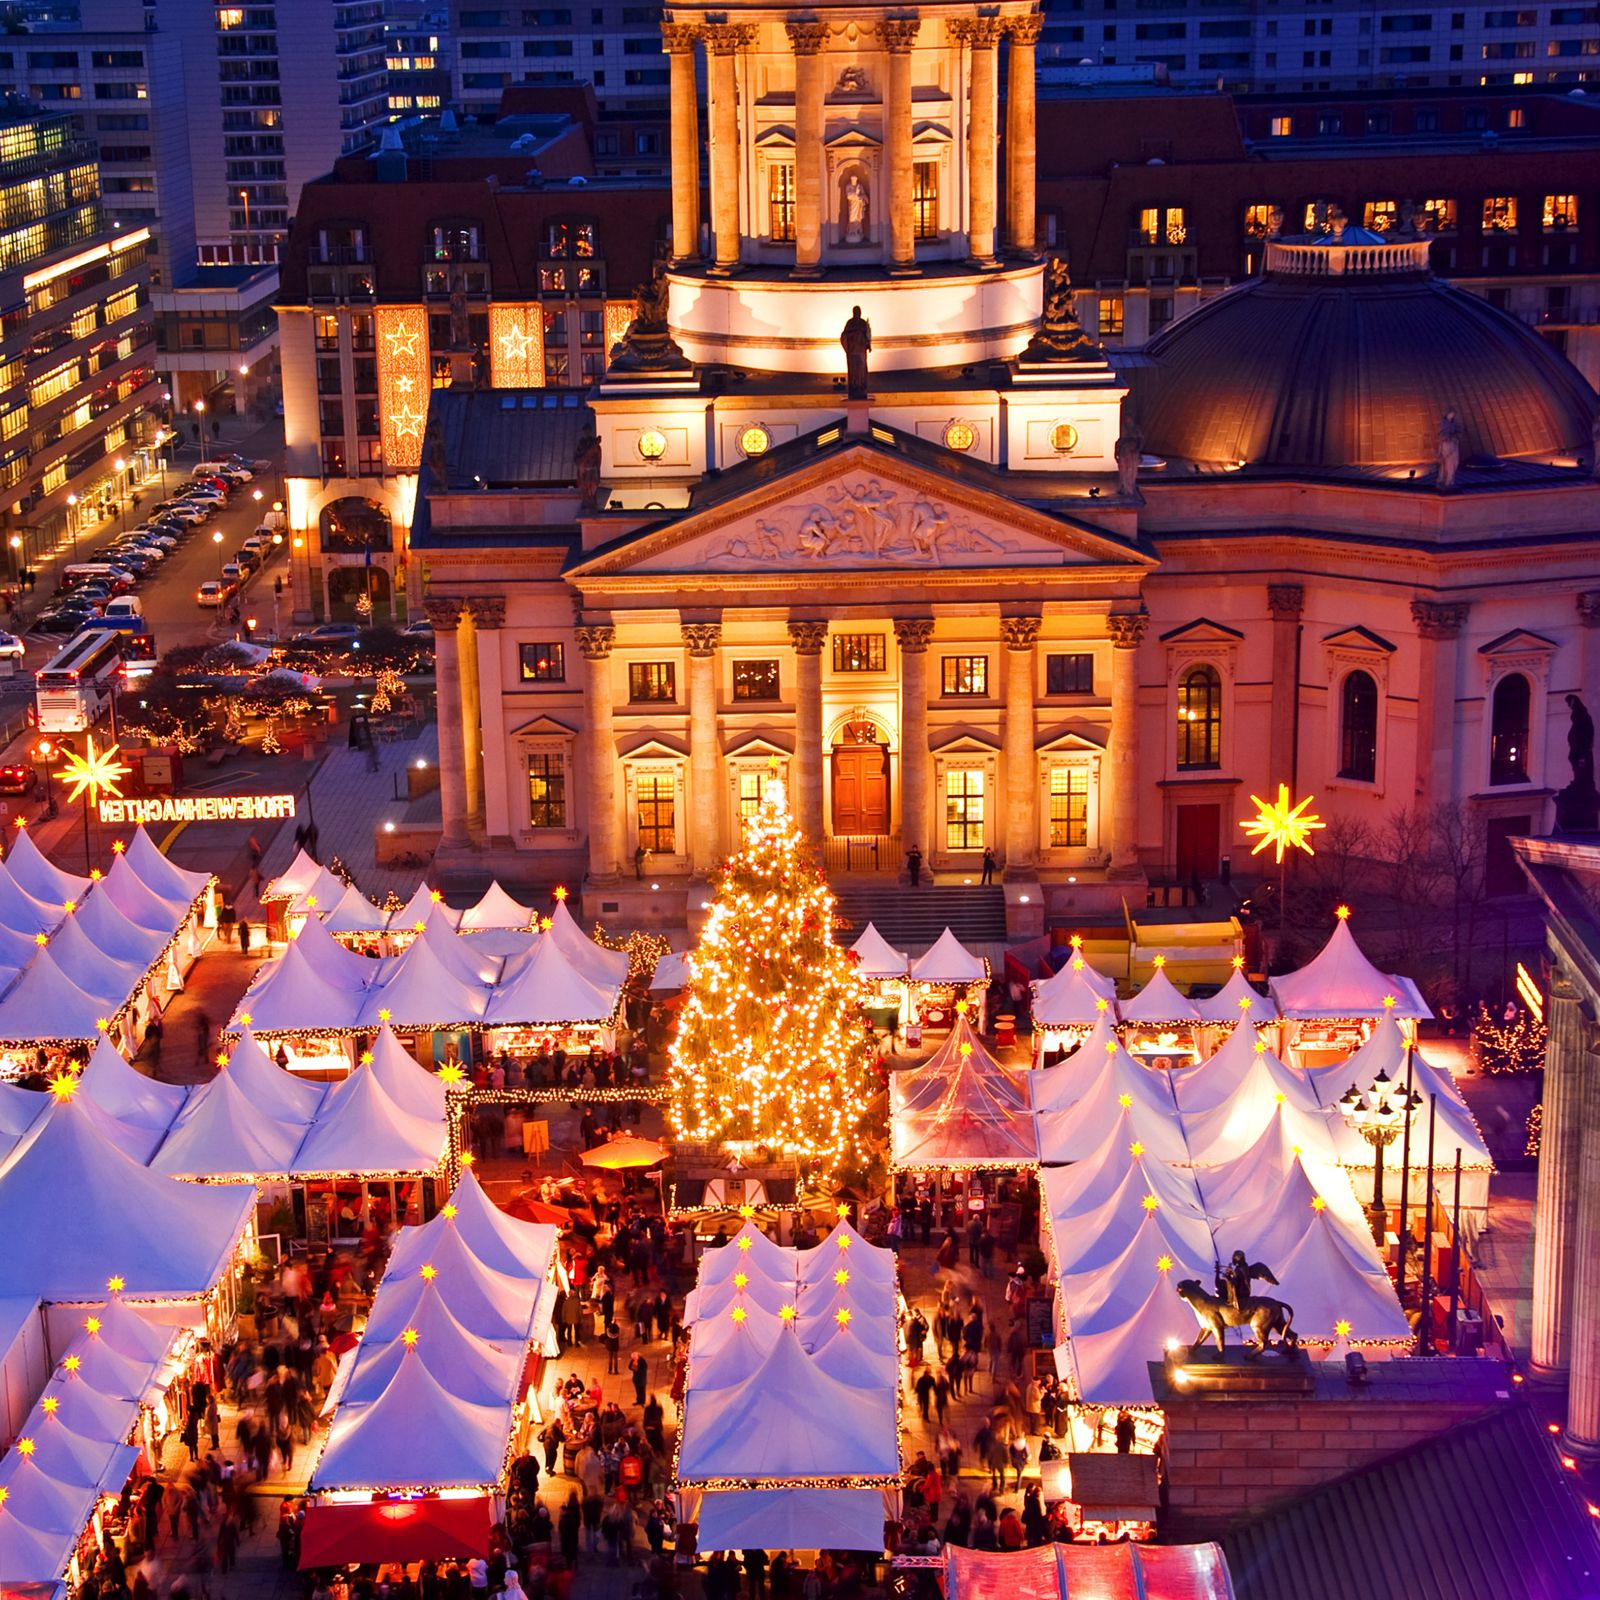 12 Best Christmas Markets In Europe To Visit This Year - Hand Luggage